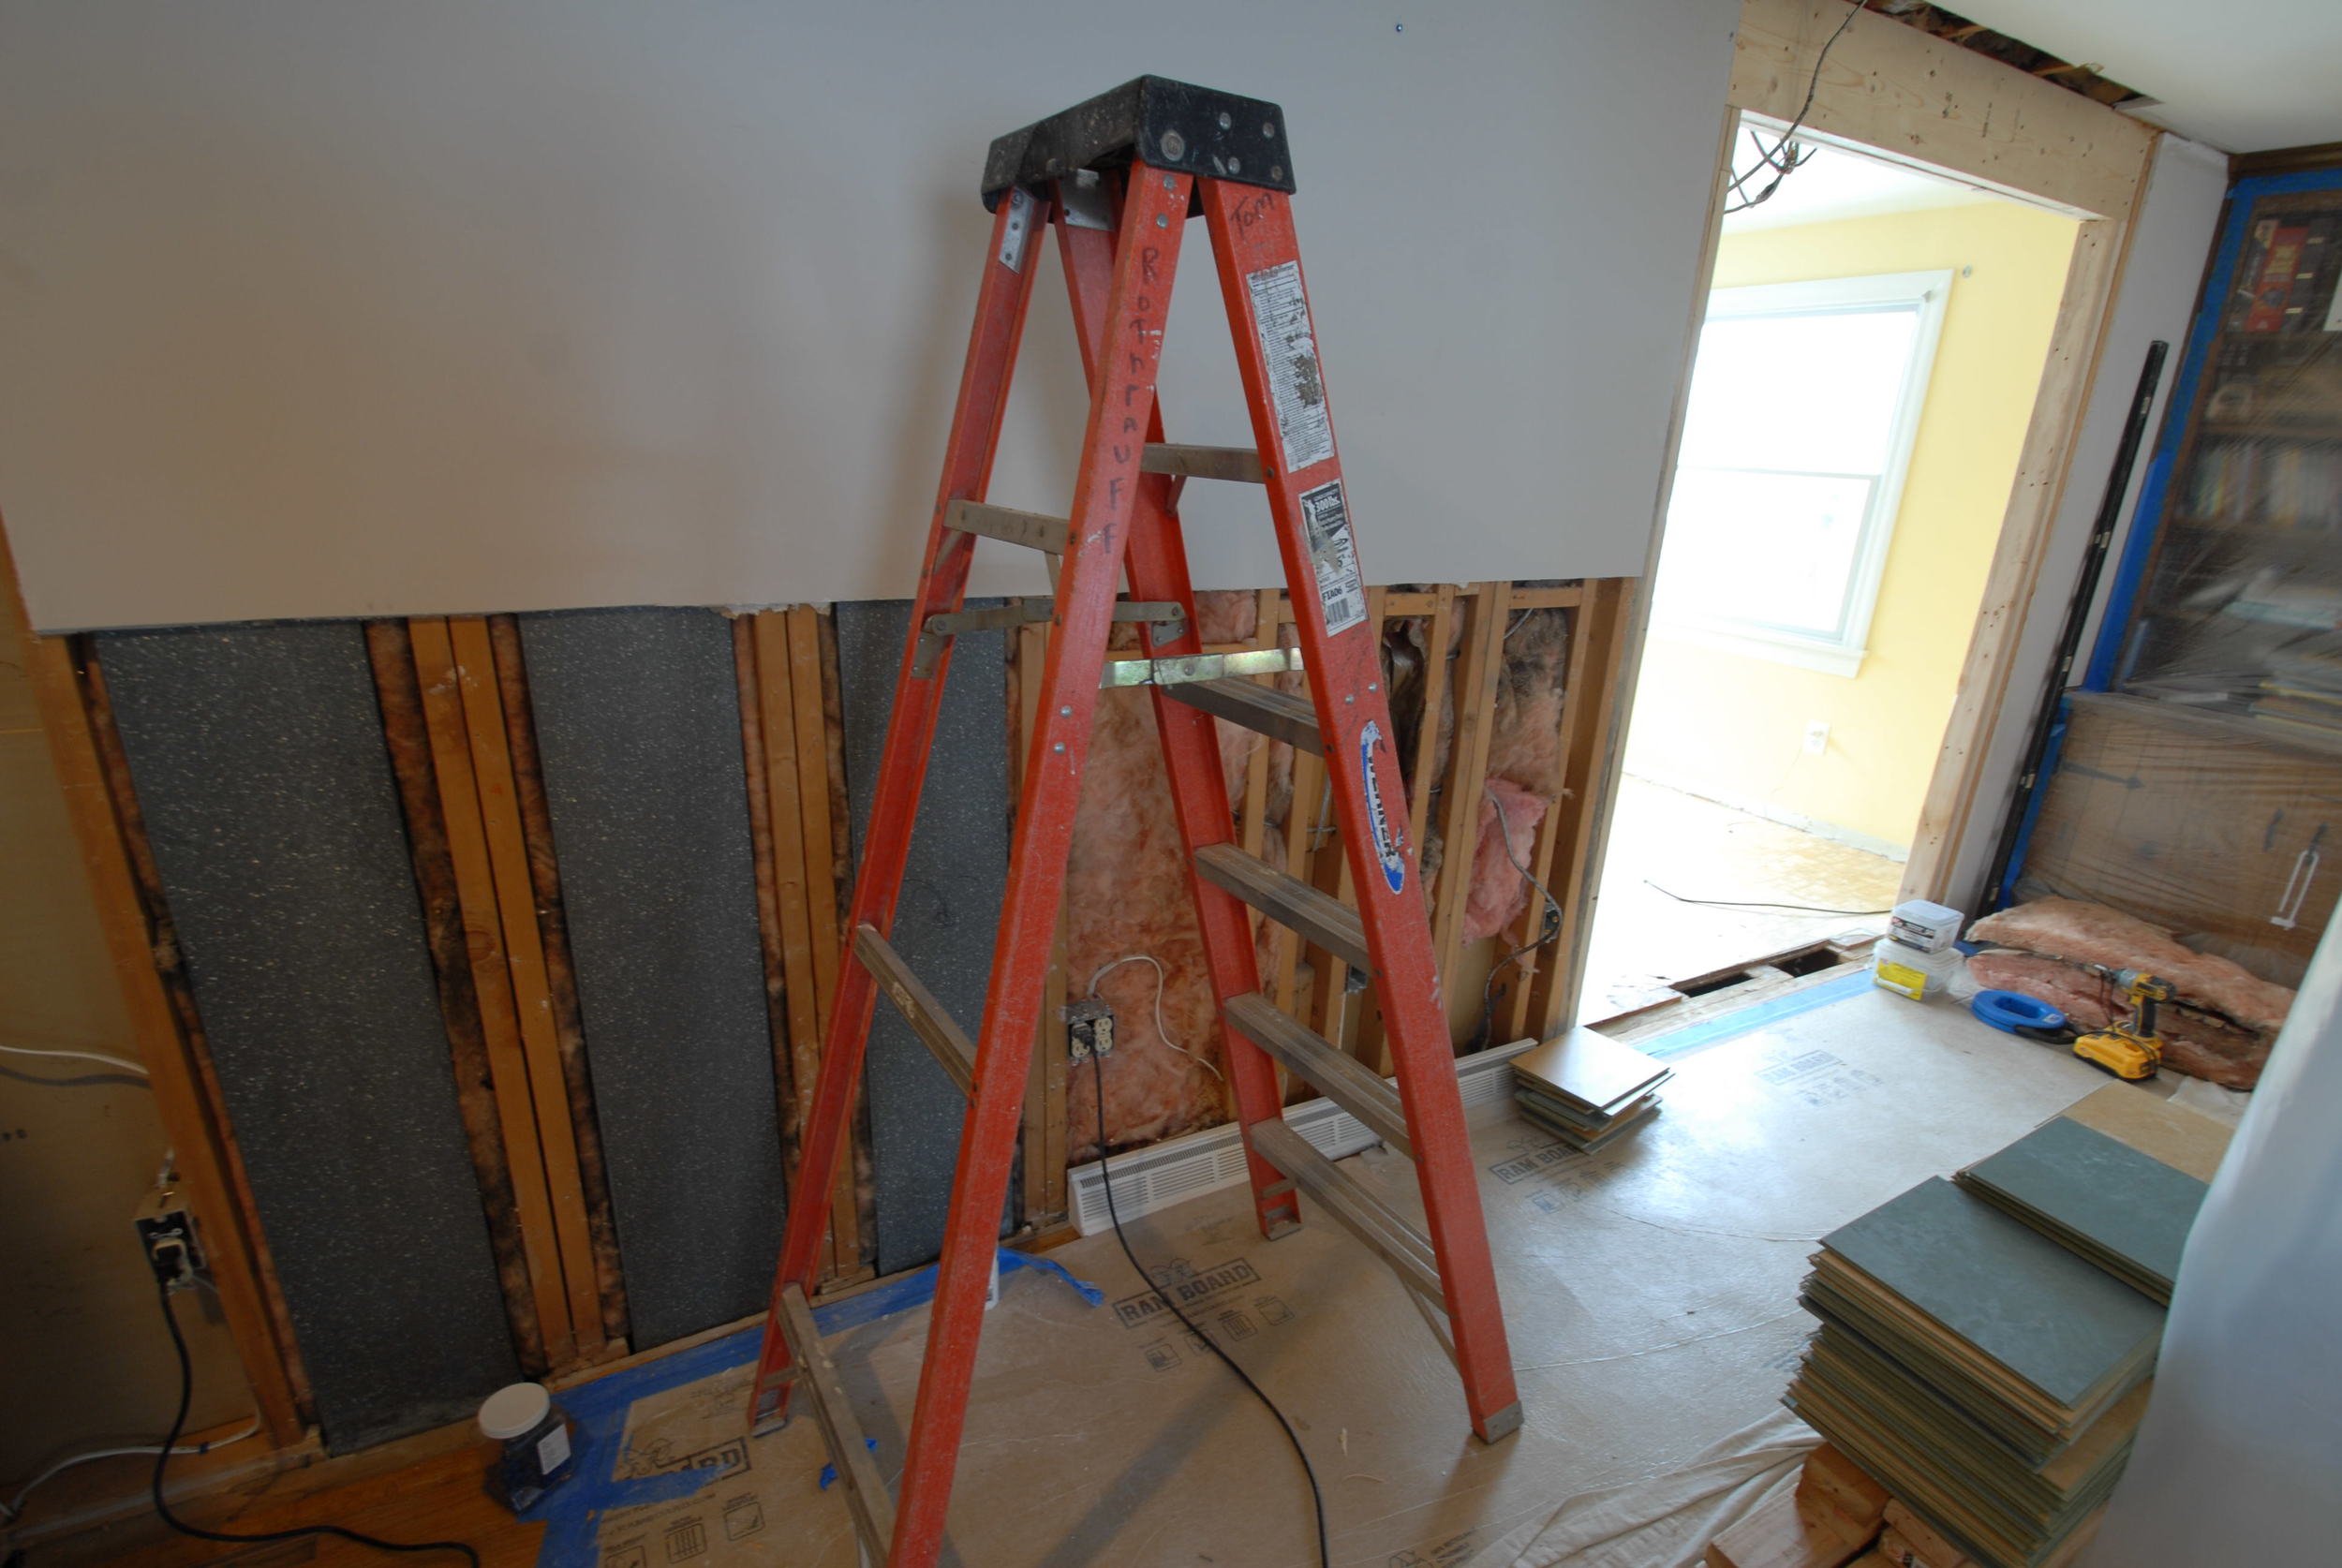 DURING: New opening from living room to breakfast nook